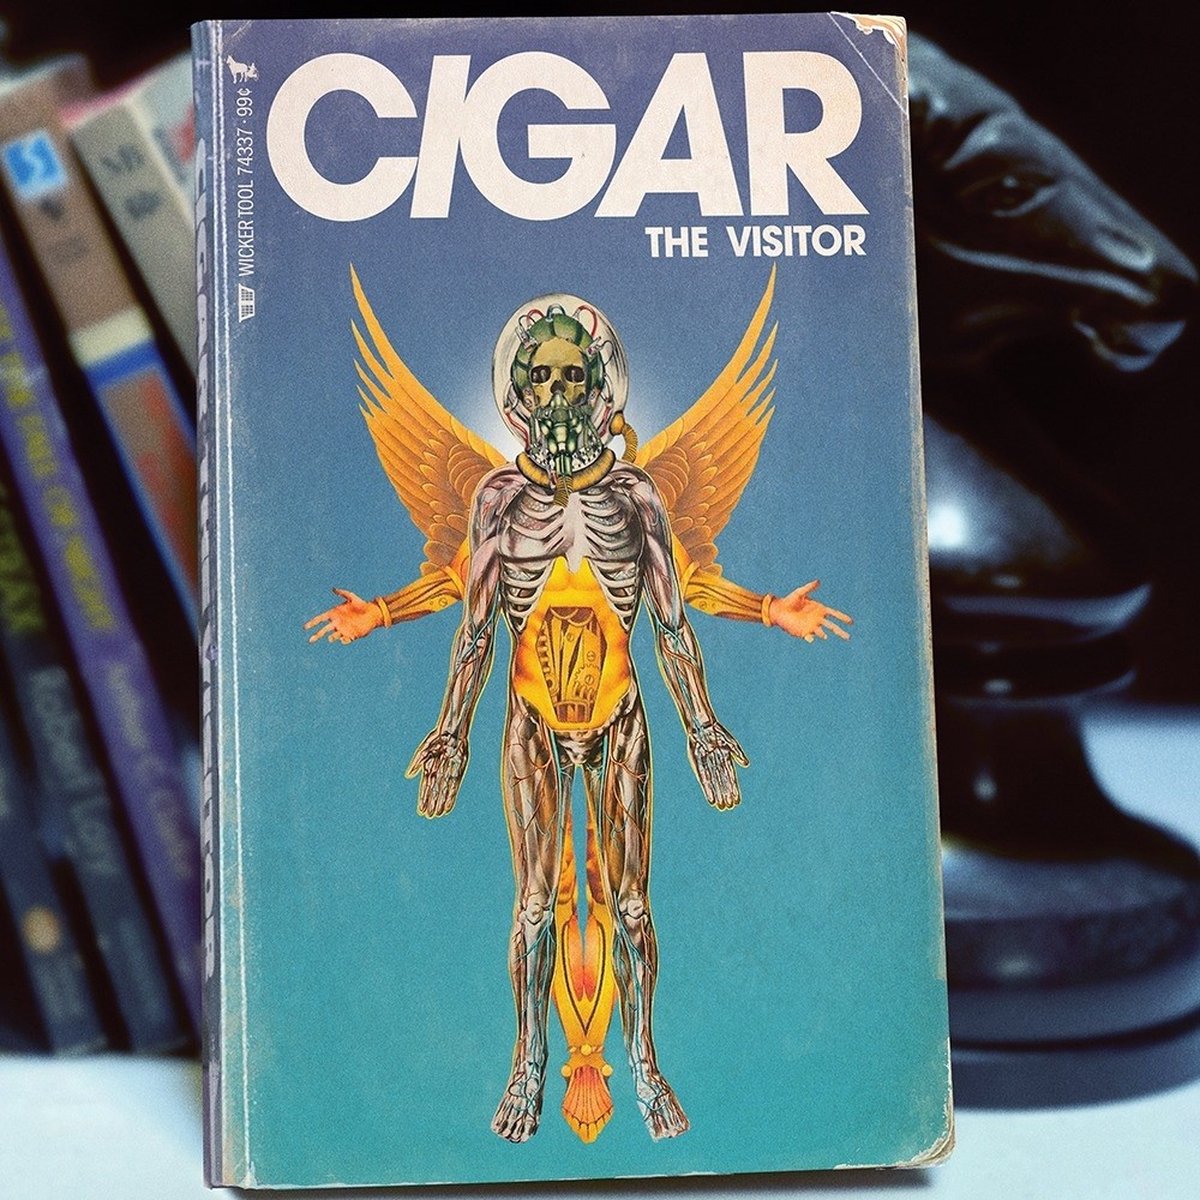 Cigar - The Visitor (LP)